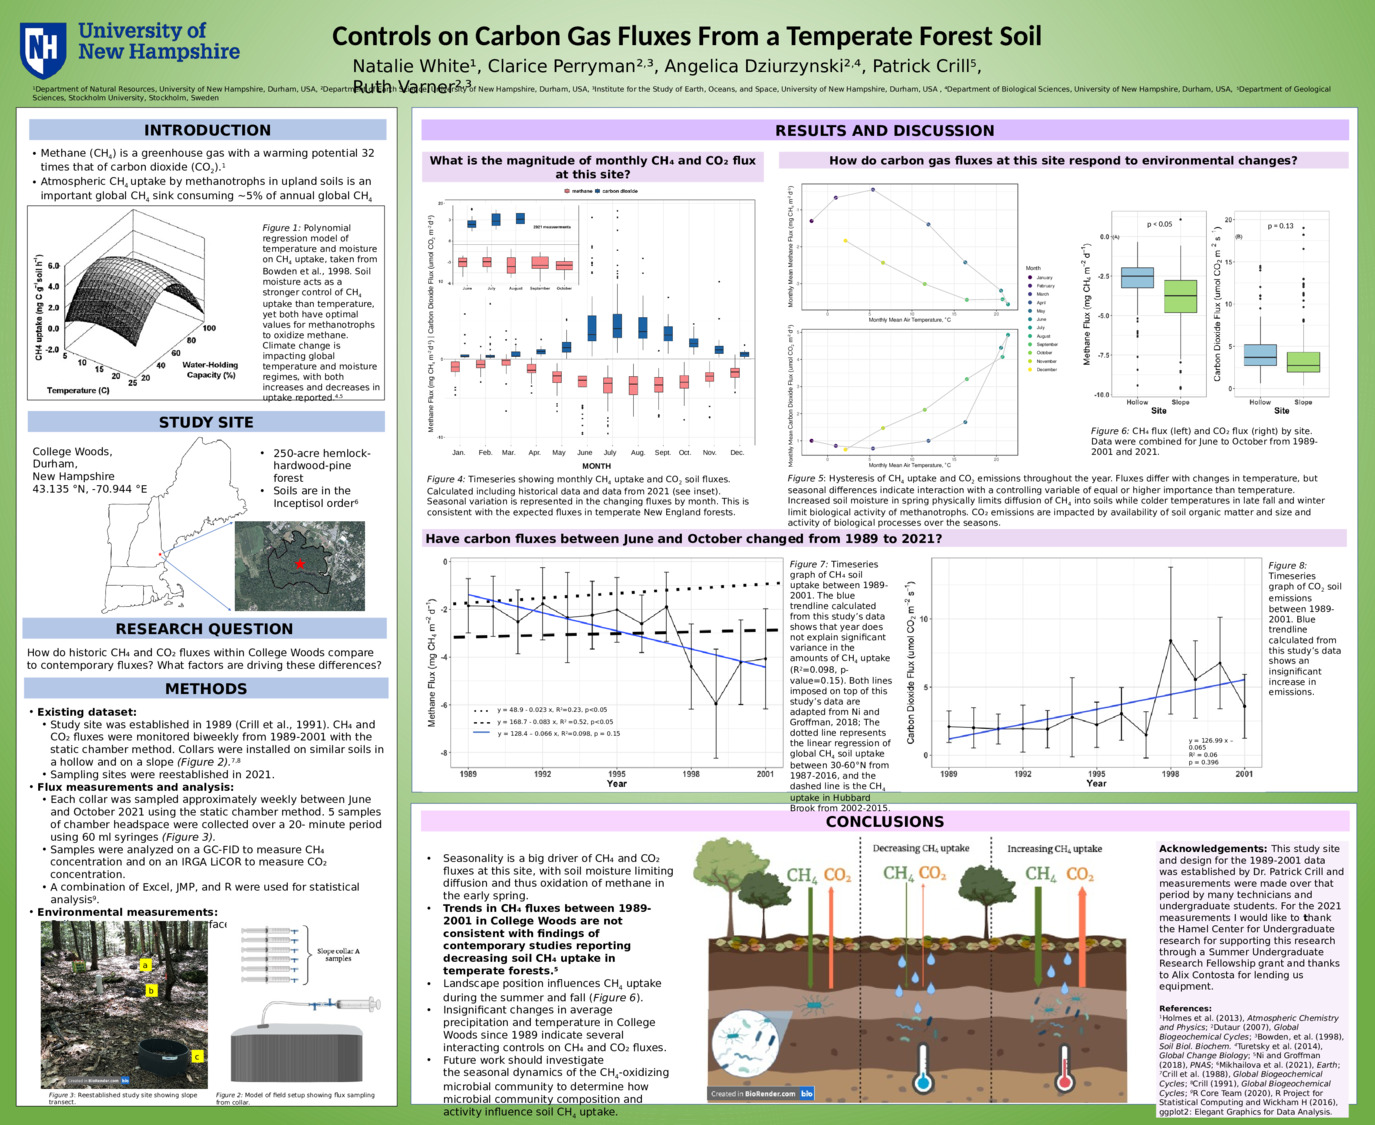 Controls On Carbon Gas Fluxes From A Temperate Forest Soil by naw1014